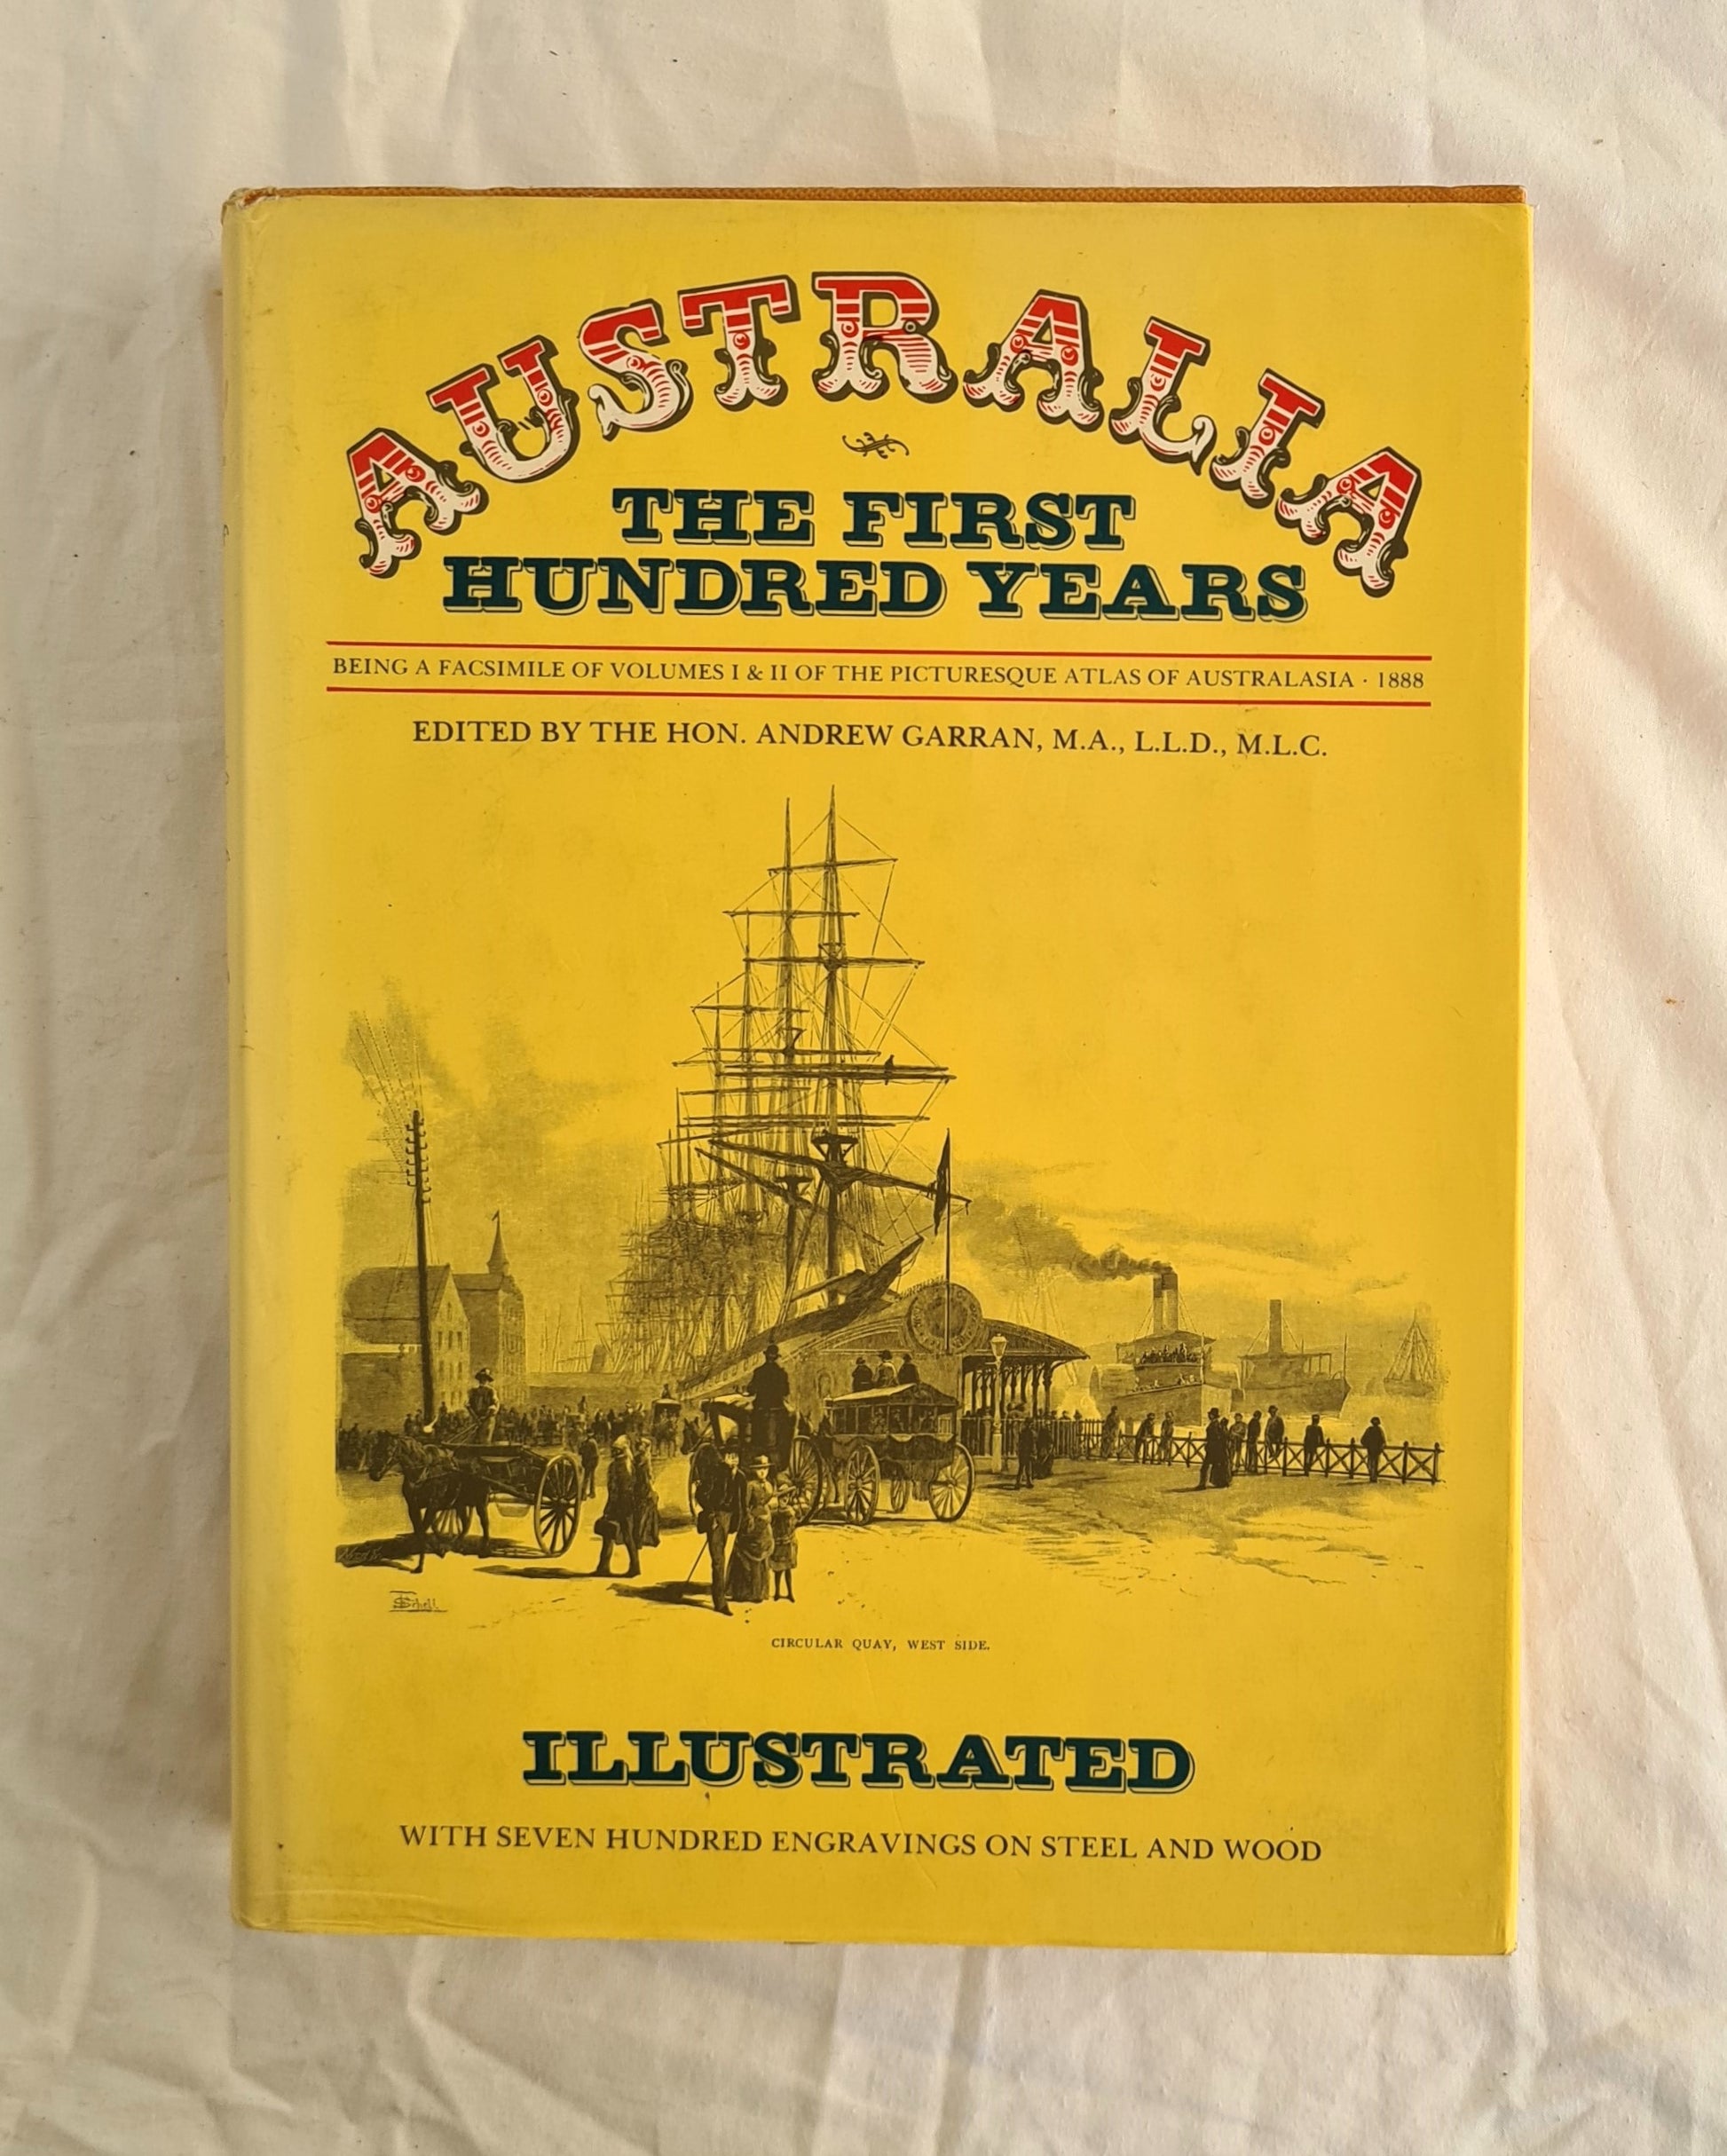 Australia The First Hundred Years  Being a Facsimile of Volumes I & II of the Picturesque Atlas of Australasia - 1888  Edited by Andrew Garran